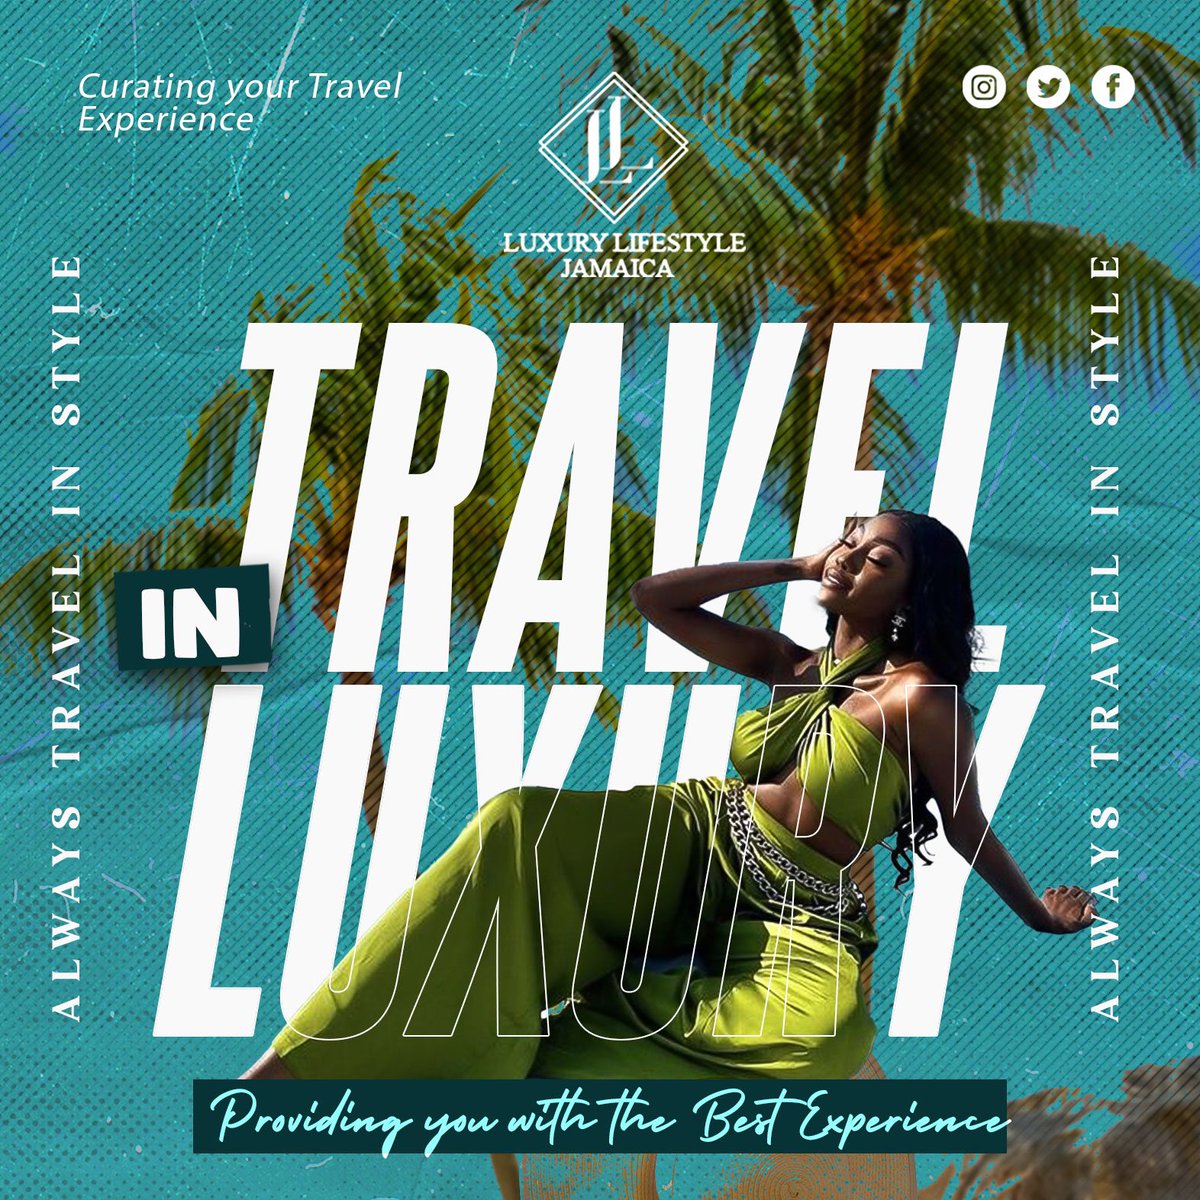 Travel in Luxury and Style with #luxetraveljamaica it’s all in the experience .
.
Caribbean vacations are the best!
.
.
#jamaicanjewel #jamaicanjewelcondo #jamaicagrande #privatetransfers #LuxuryTravel #condo #montegobay